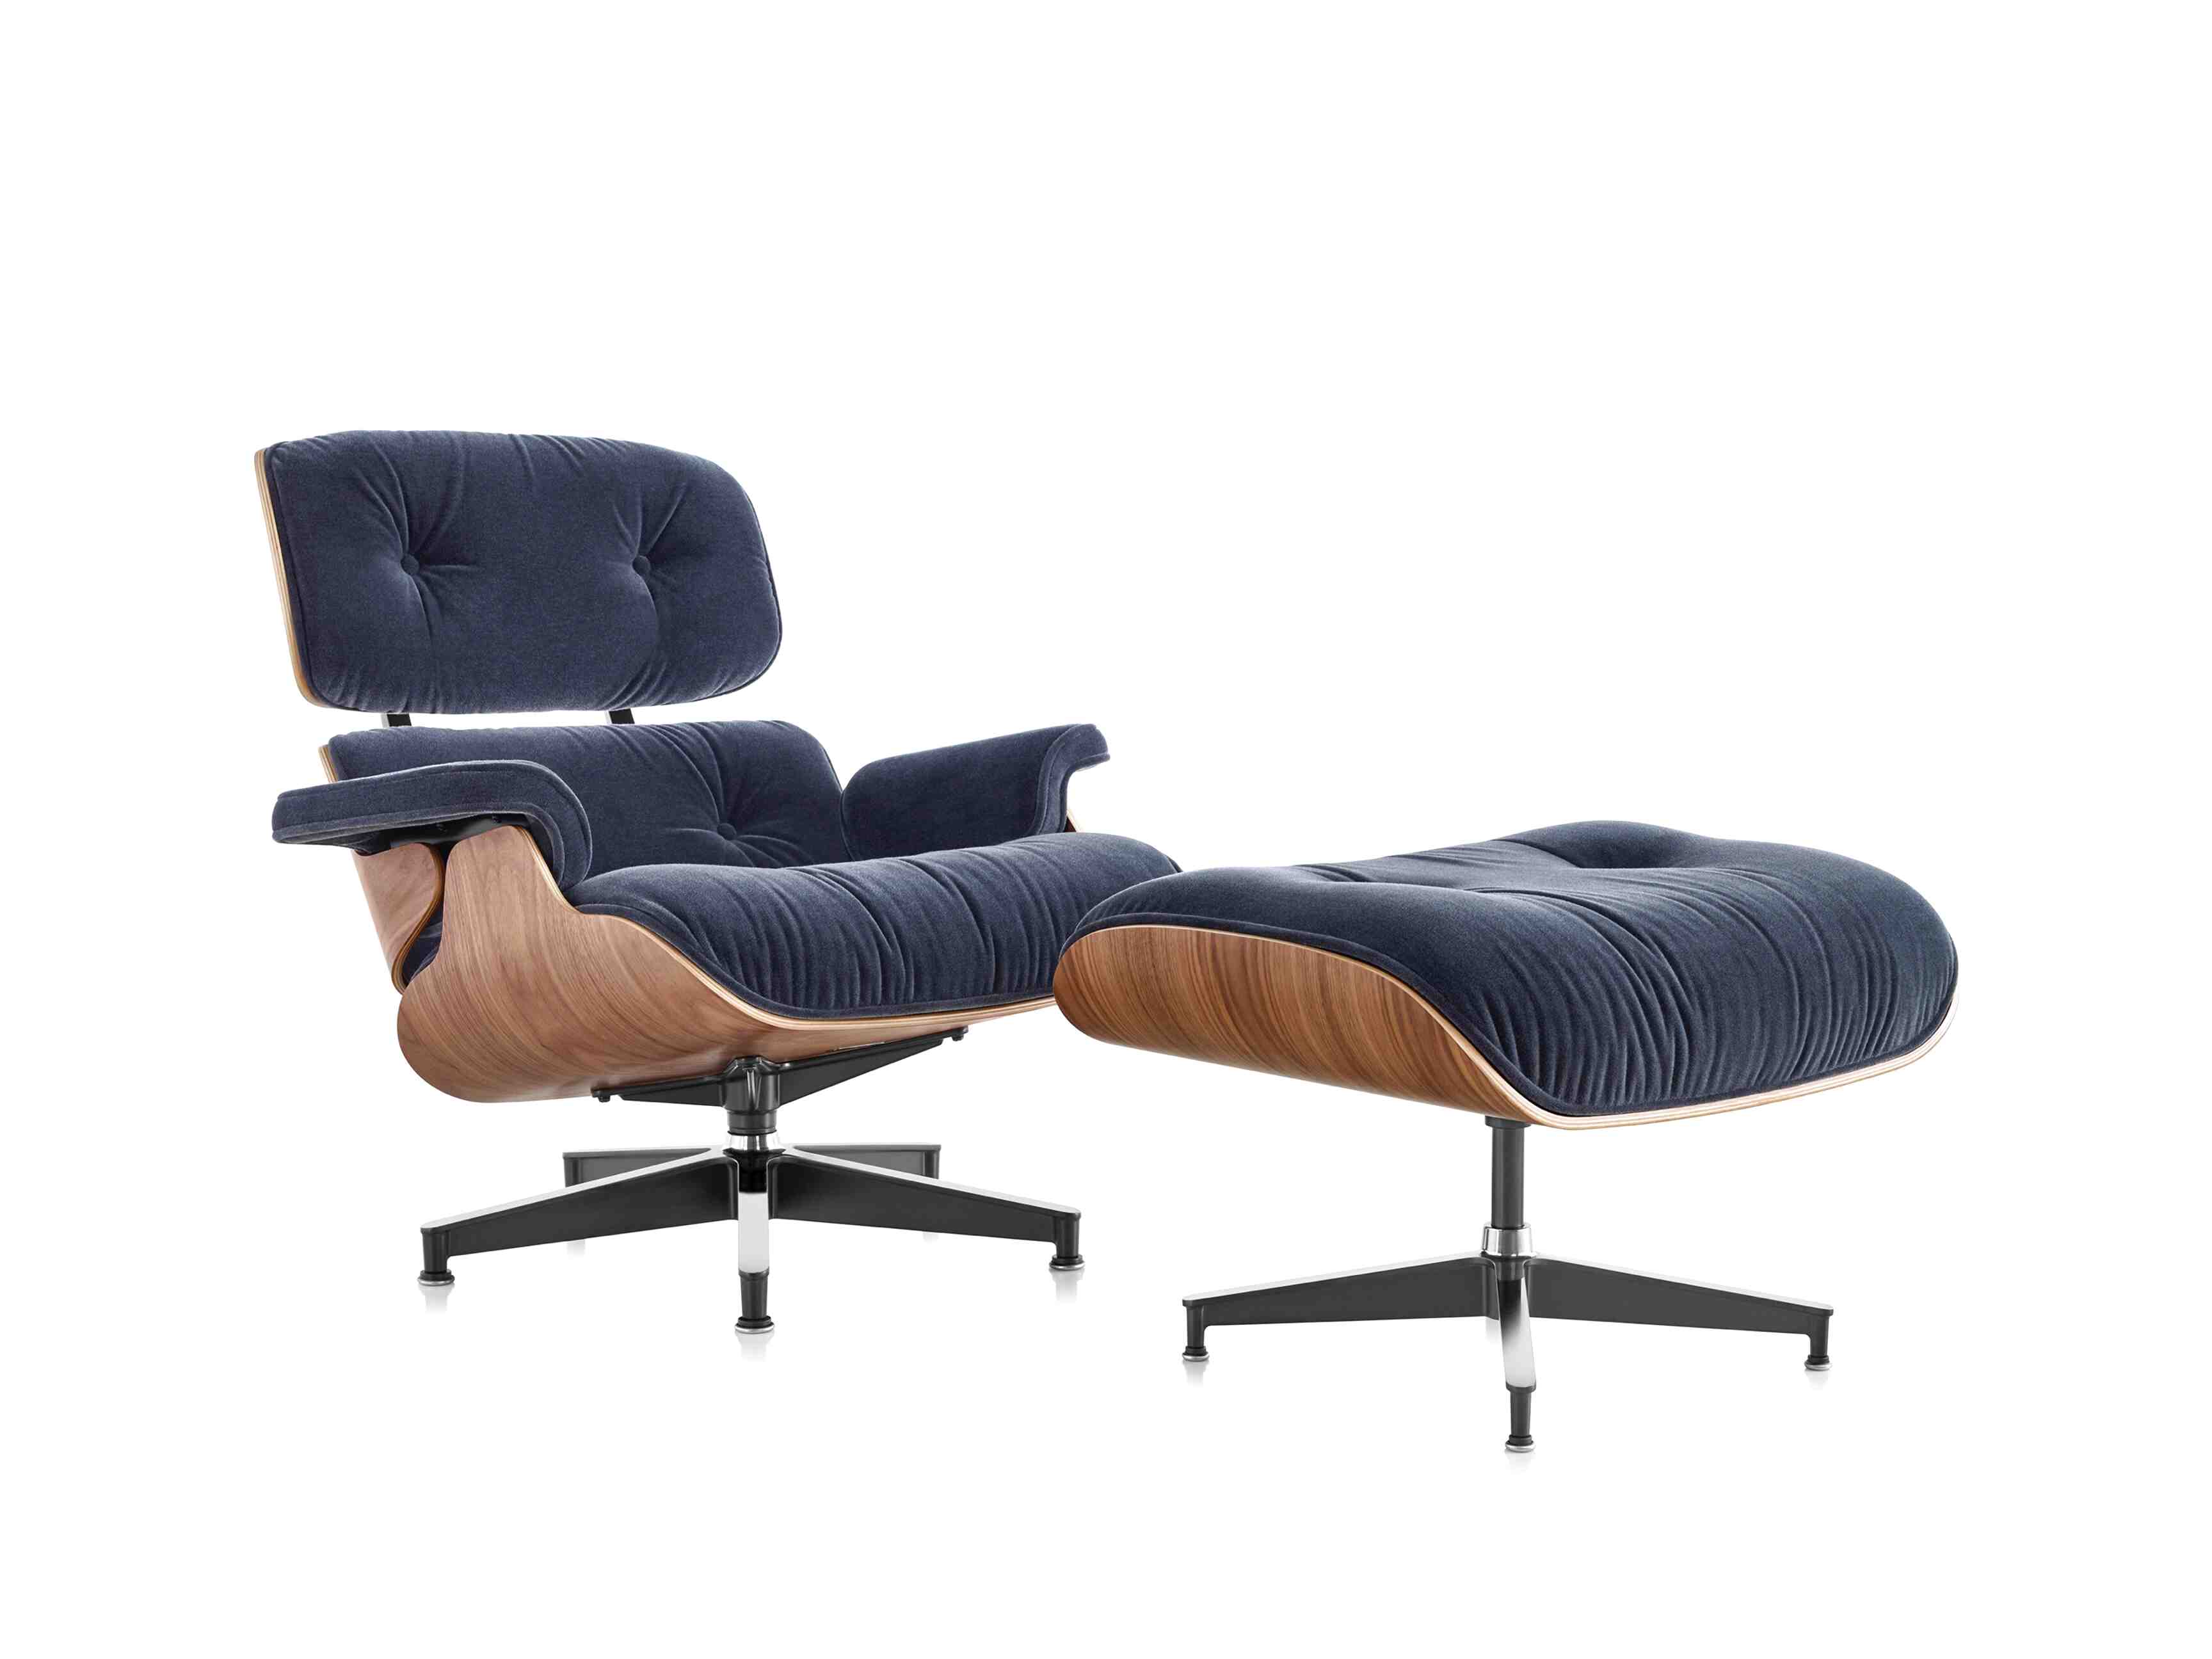 Eames Lounge Chair for sale in UK | 66 used Eames Lounge Chairs